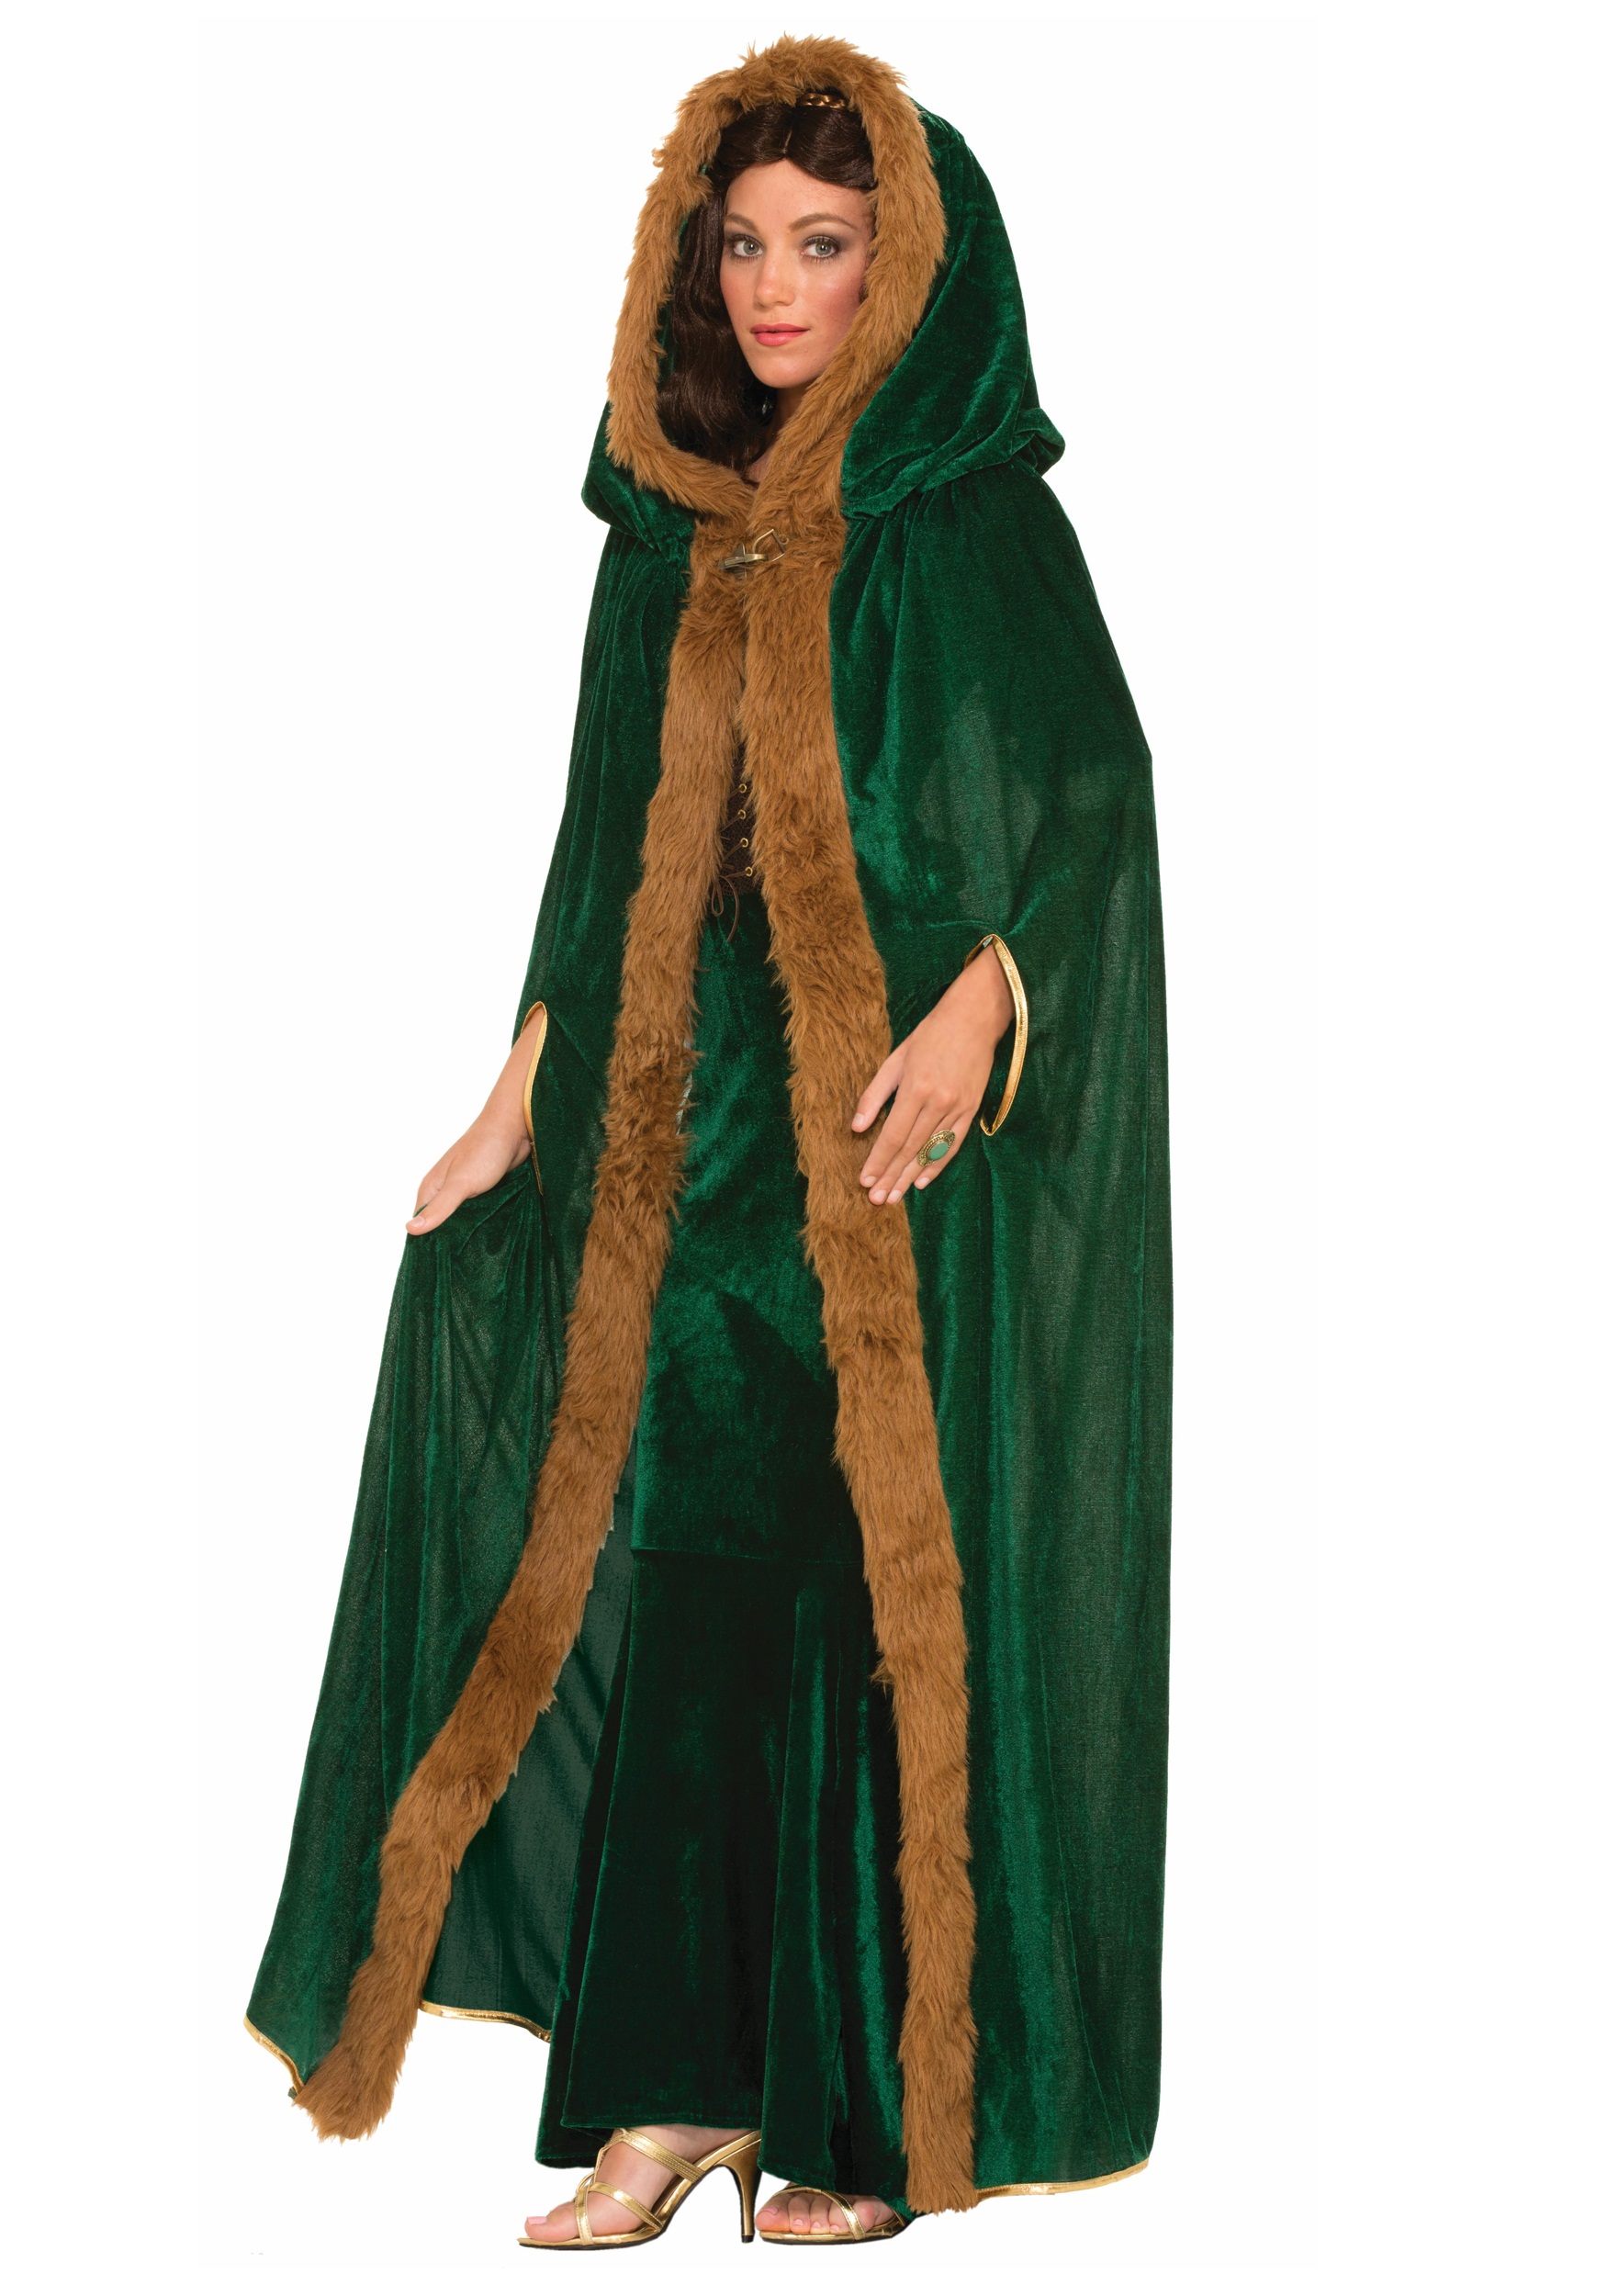 Faux Fur Trimmed Green Cape for Adults